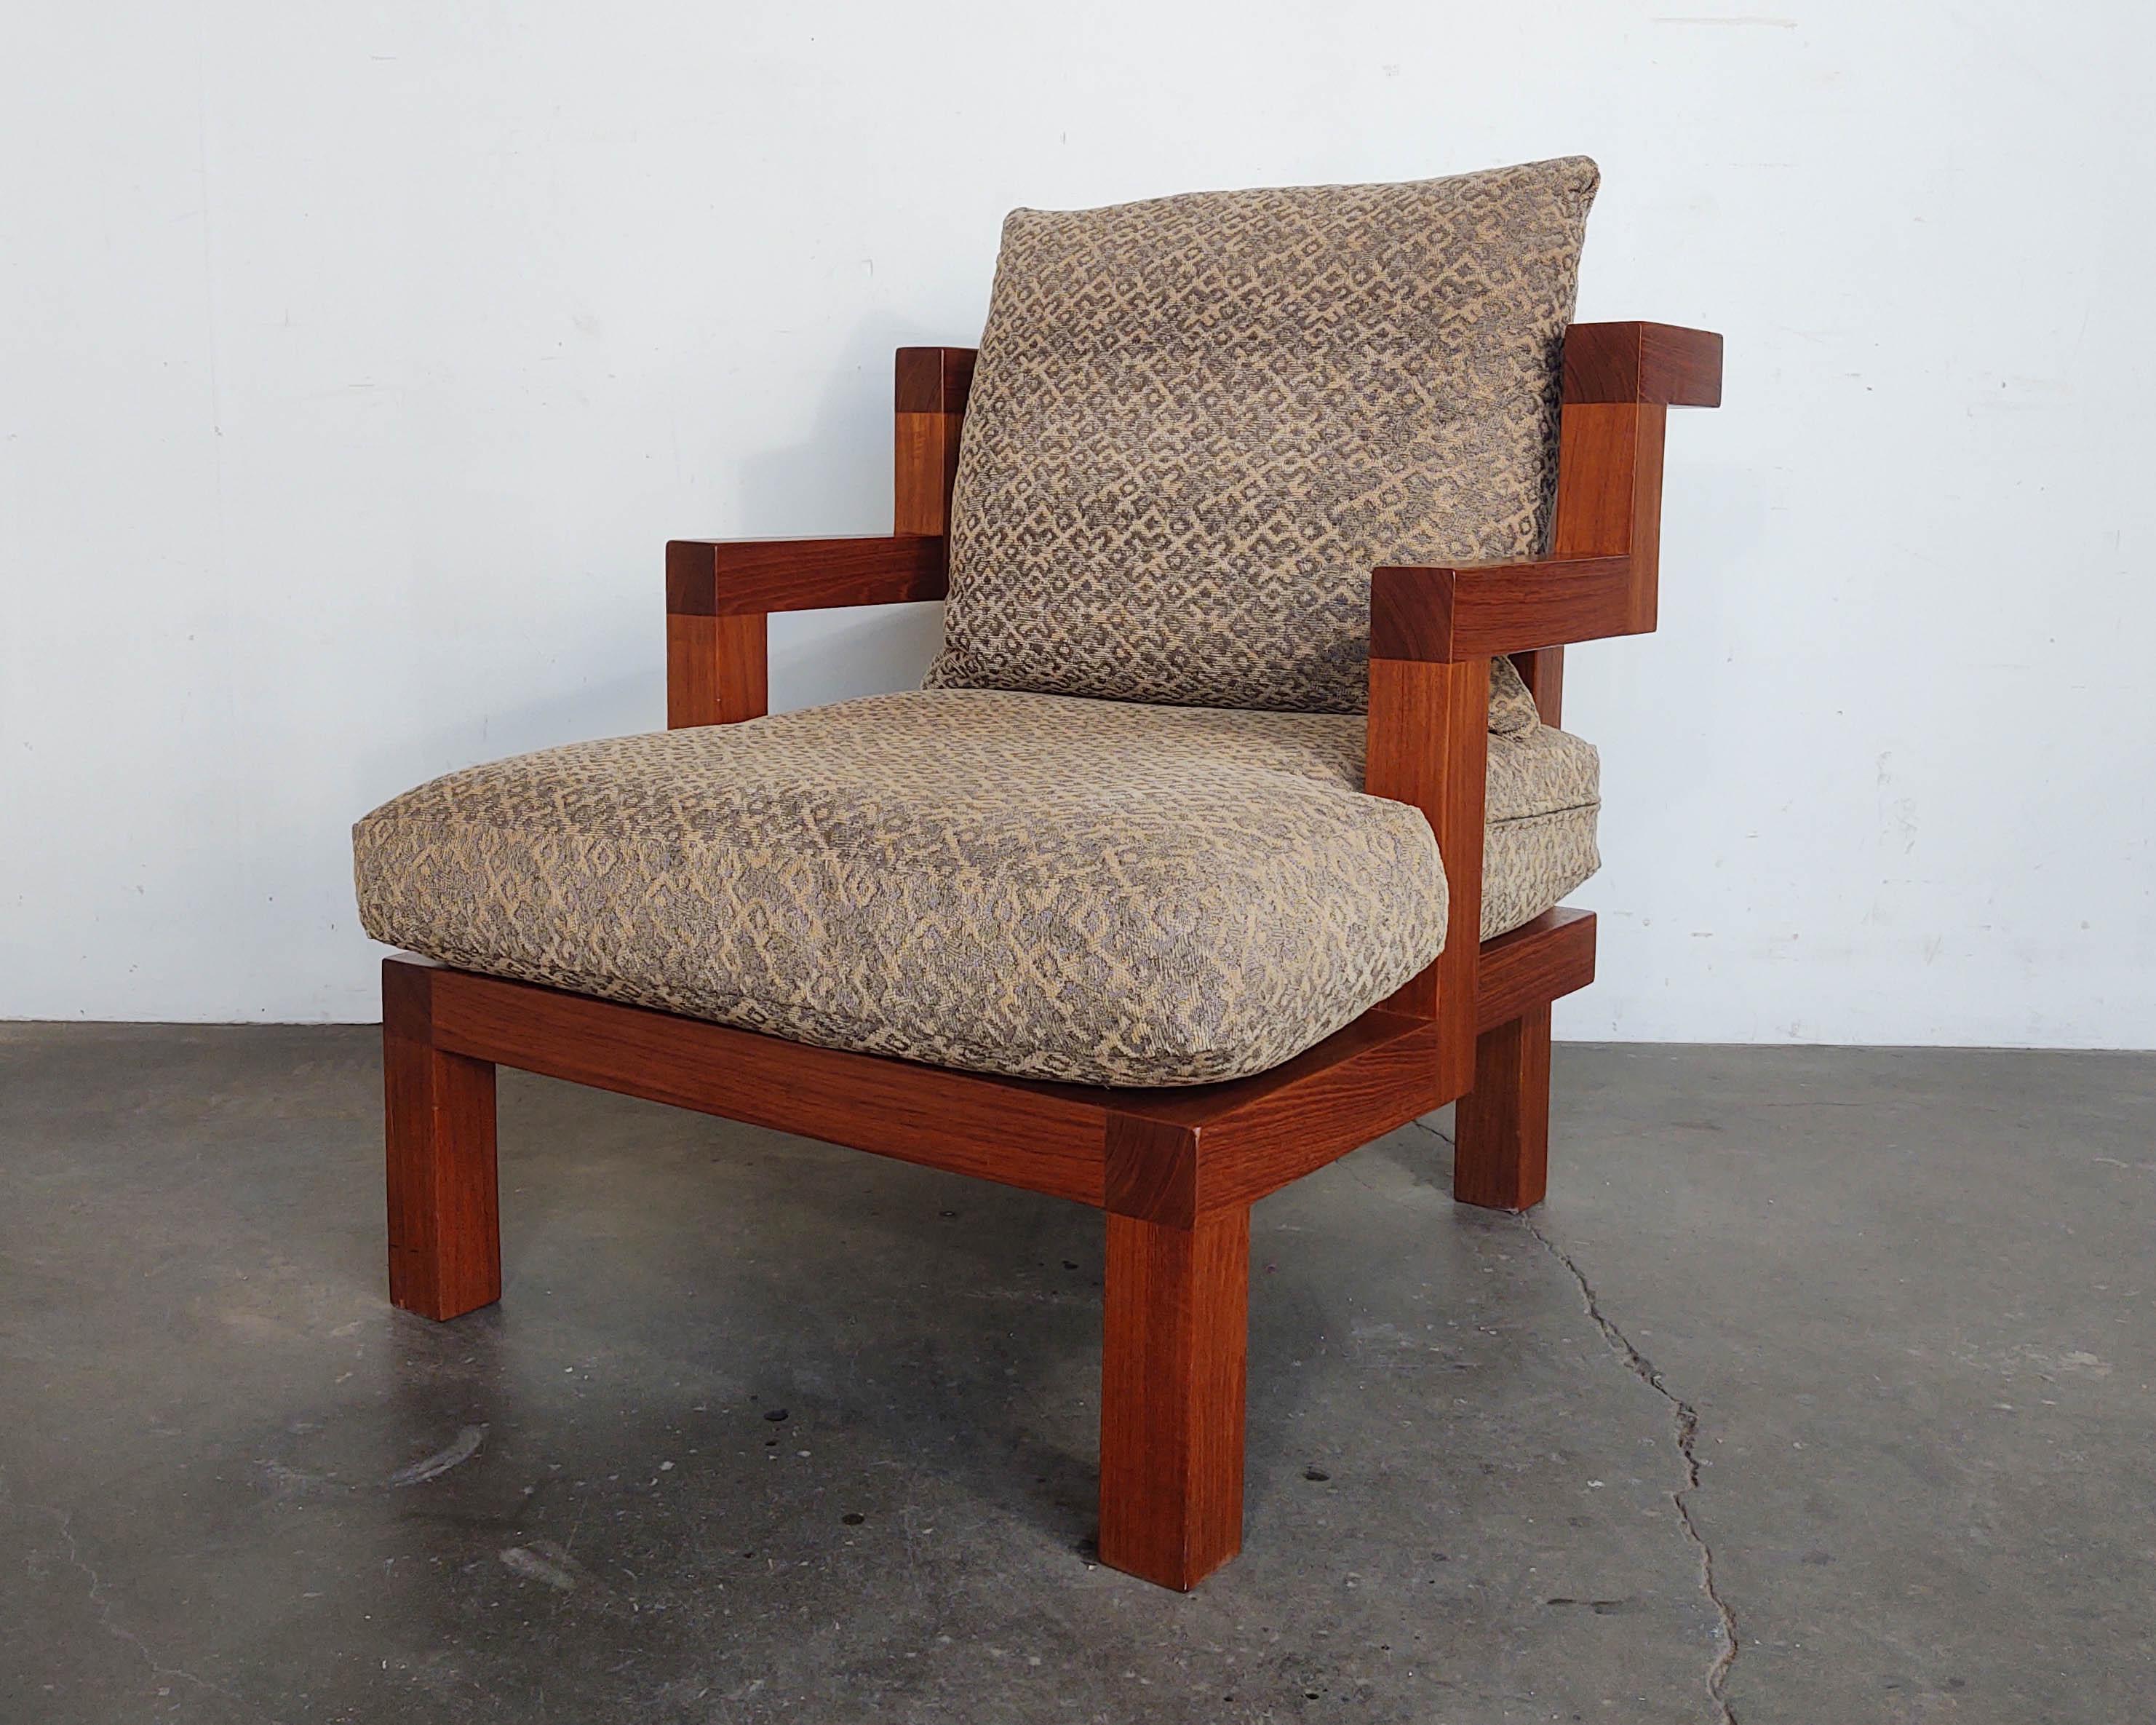 Beautiful handmade solid teak wood chair with stair-step arms by Alwy Visschedyk. Excellent craftsmanship with no visible hardware and lovely joinery. This design offers intrigue at every angle. Down-filled cushions have original upholstery. Some